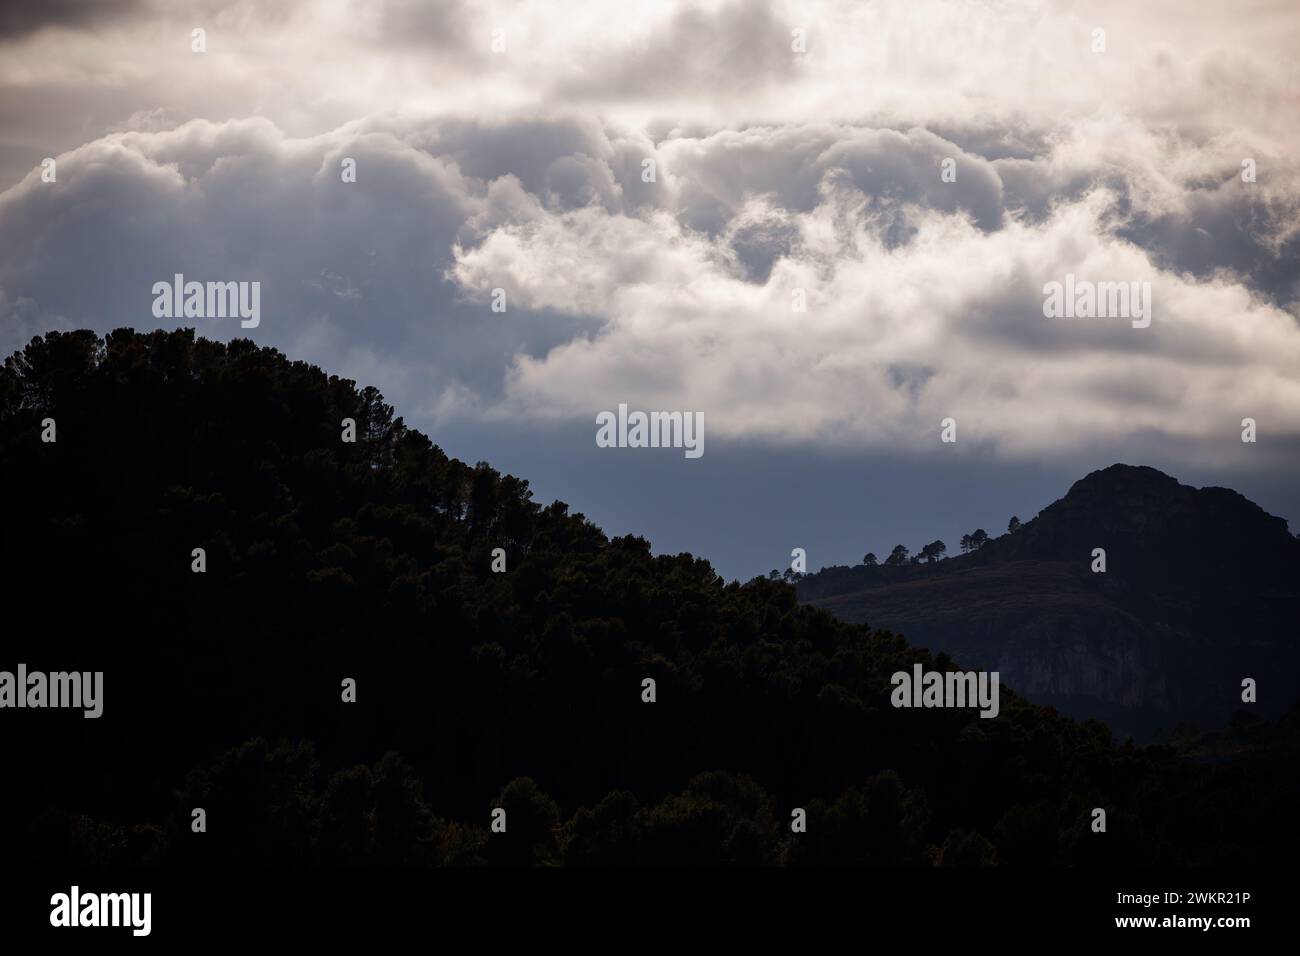 The hills of Xeraco under iridescent clouds Stock Photo